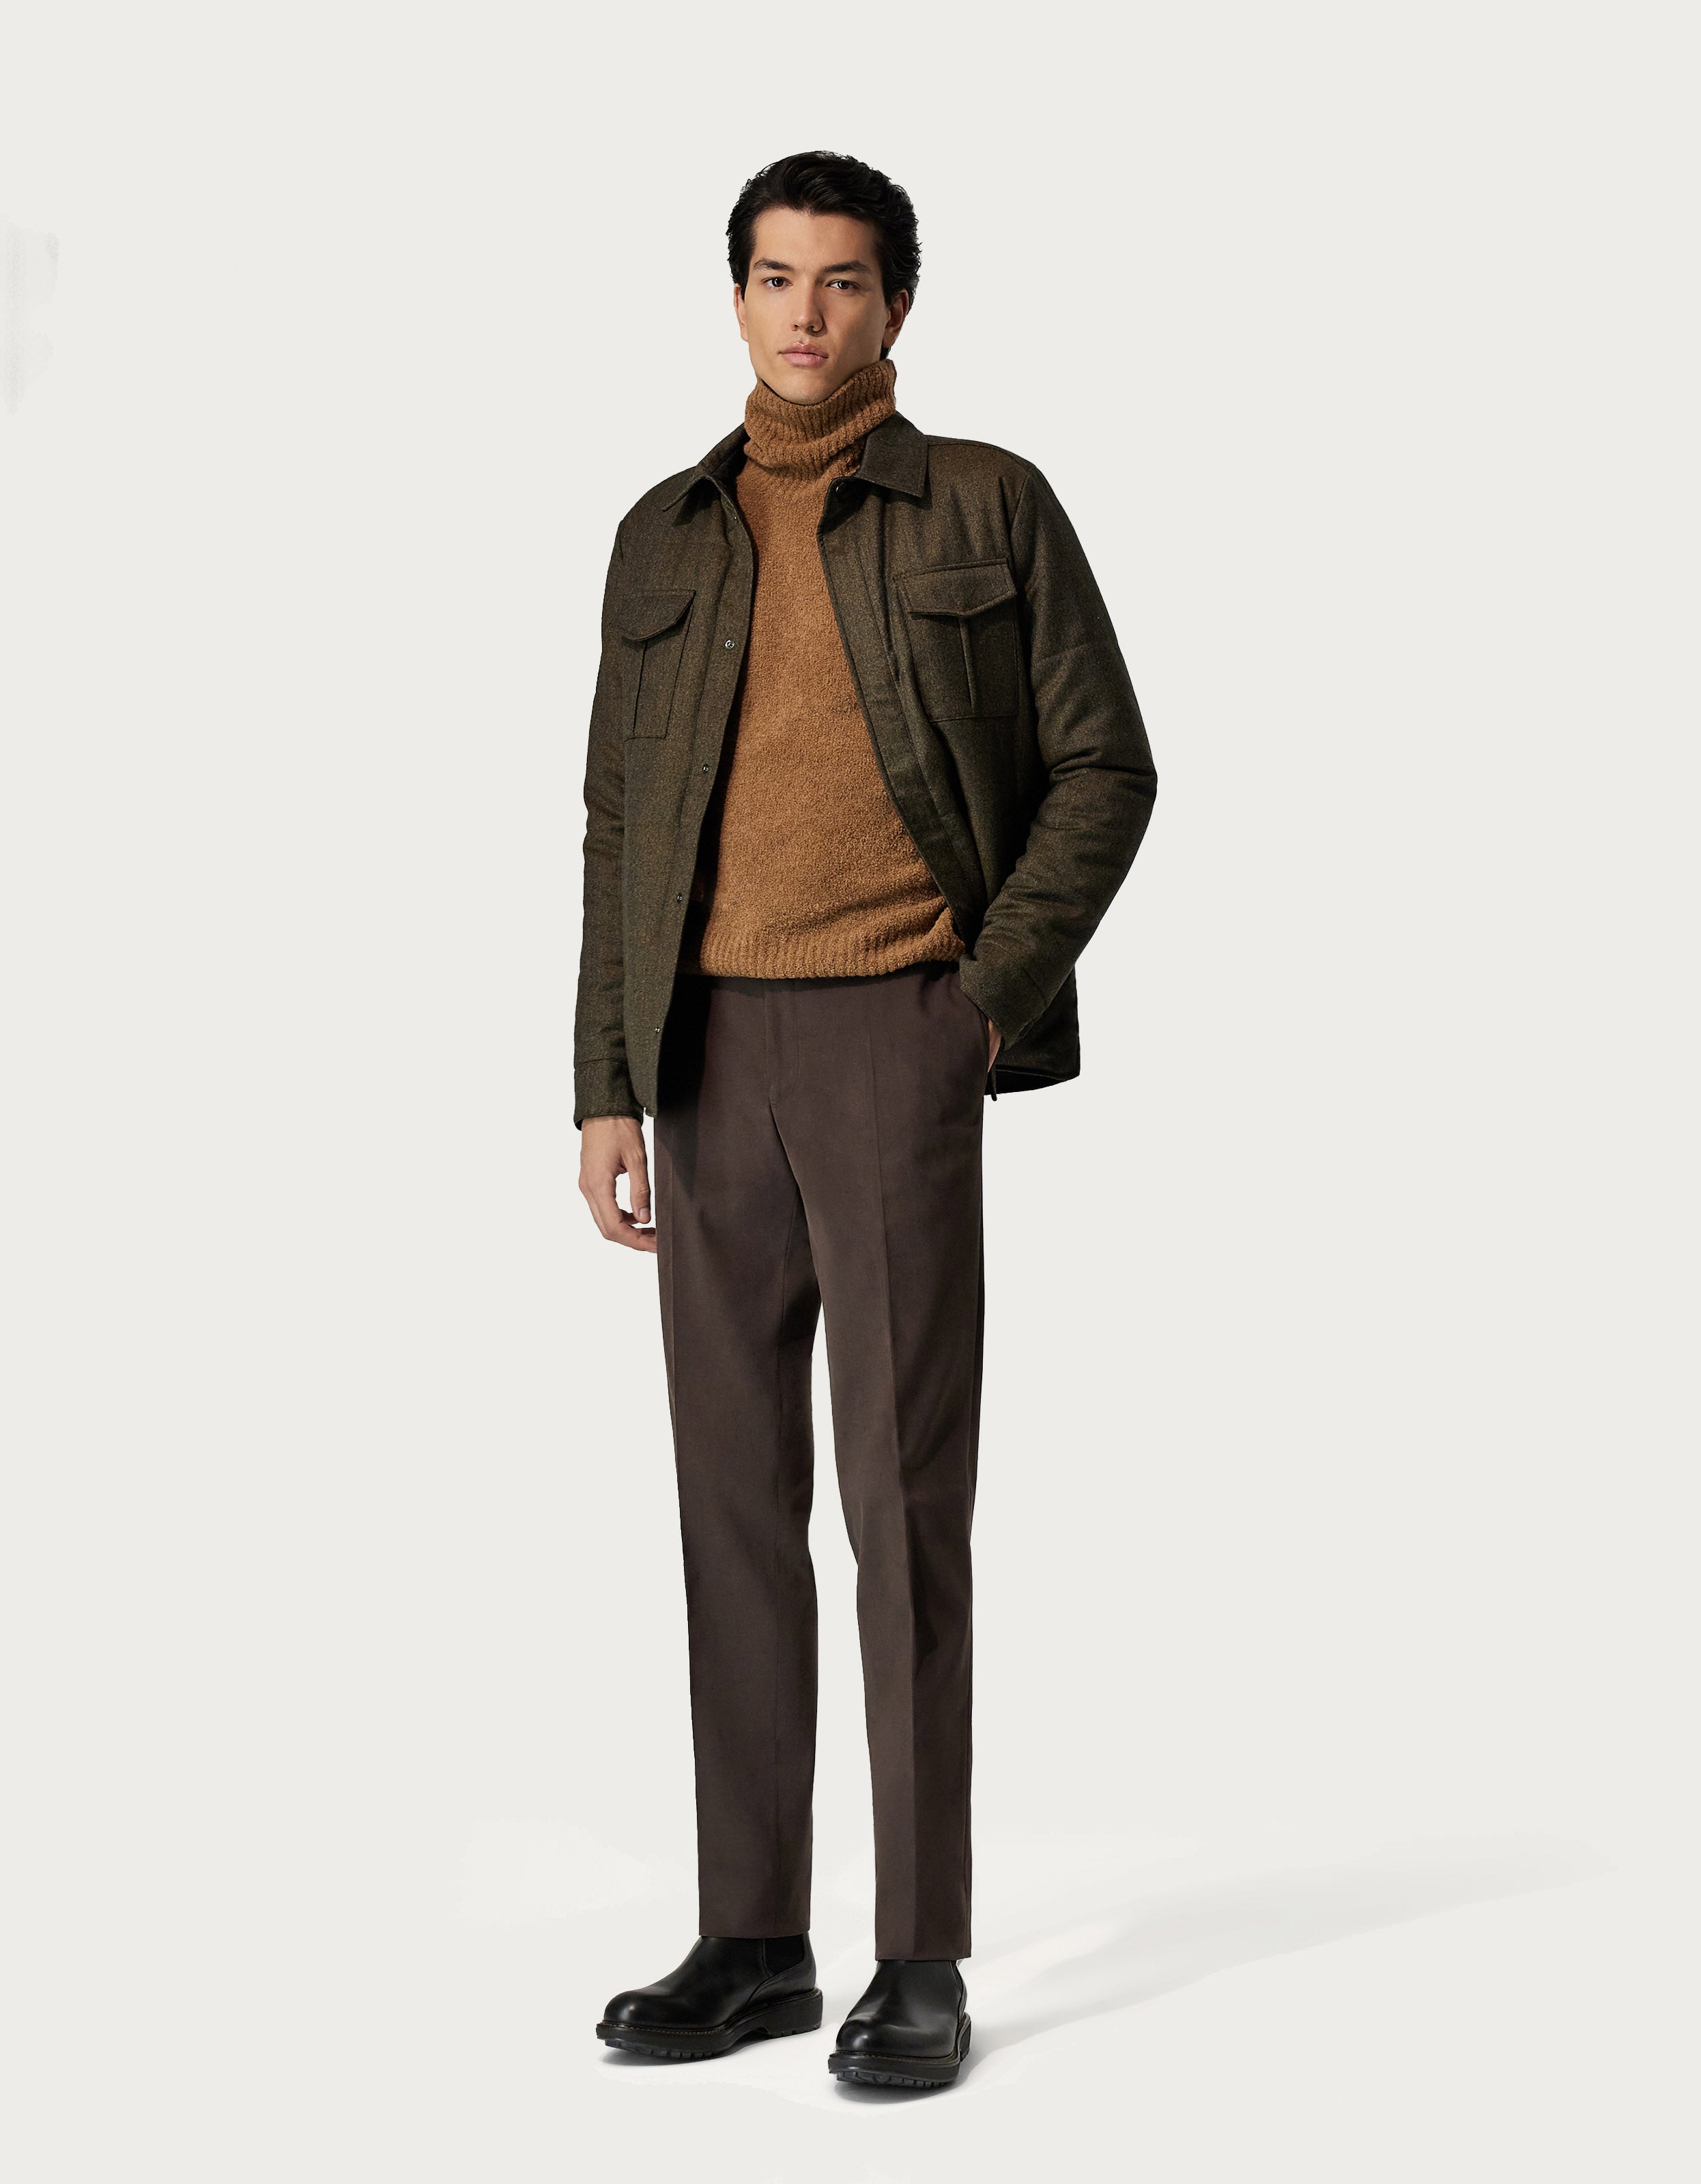 CANALI - BROWN STRETCH COTTON TROUSERS 71019-AV03425-502